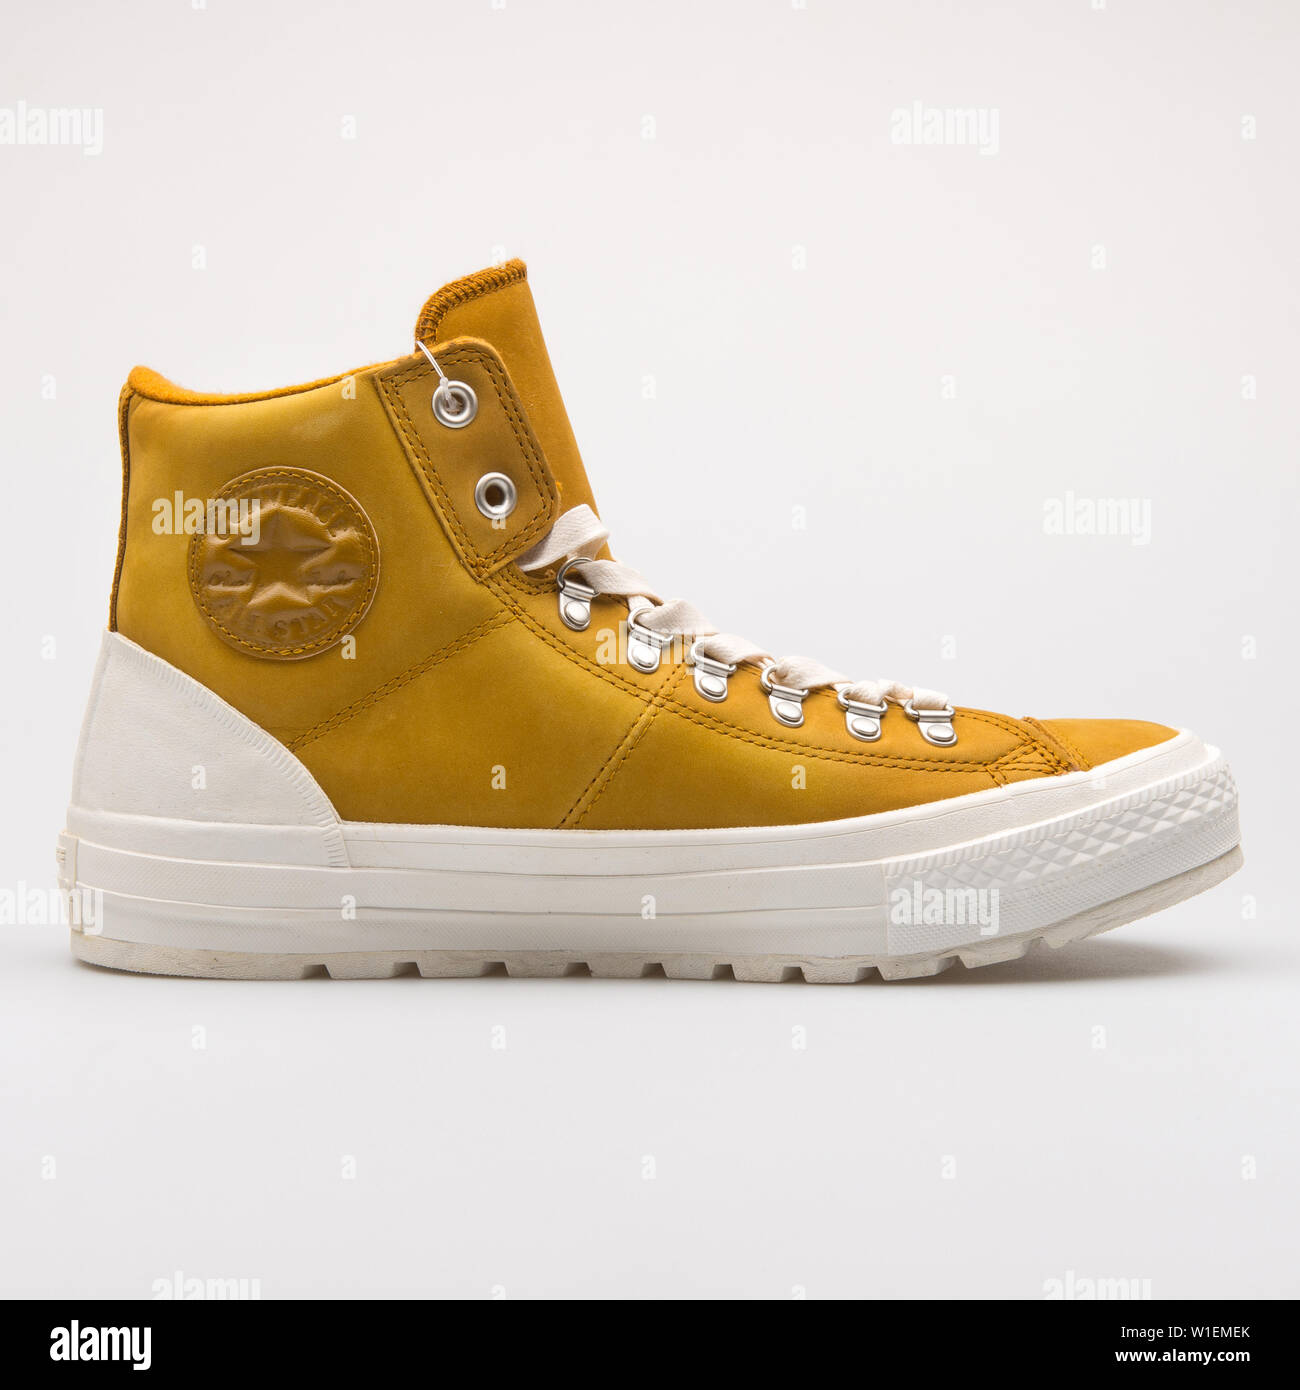 VIENNA, AUSTRIA - AUGUST 28, 2017: Converse Chuck Taylor All Star Street  Hiker High yellow sneaker on white background Stock Photo - Alamy